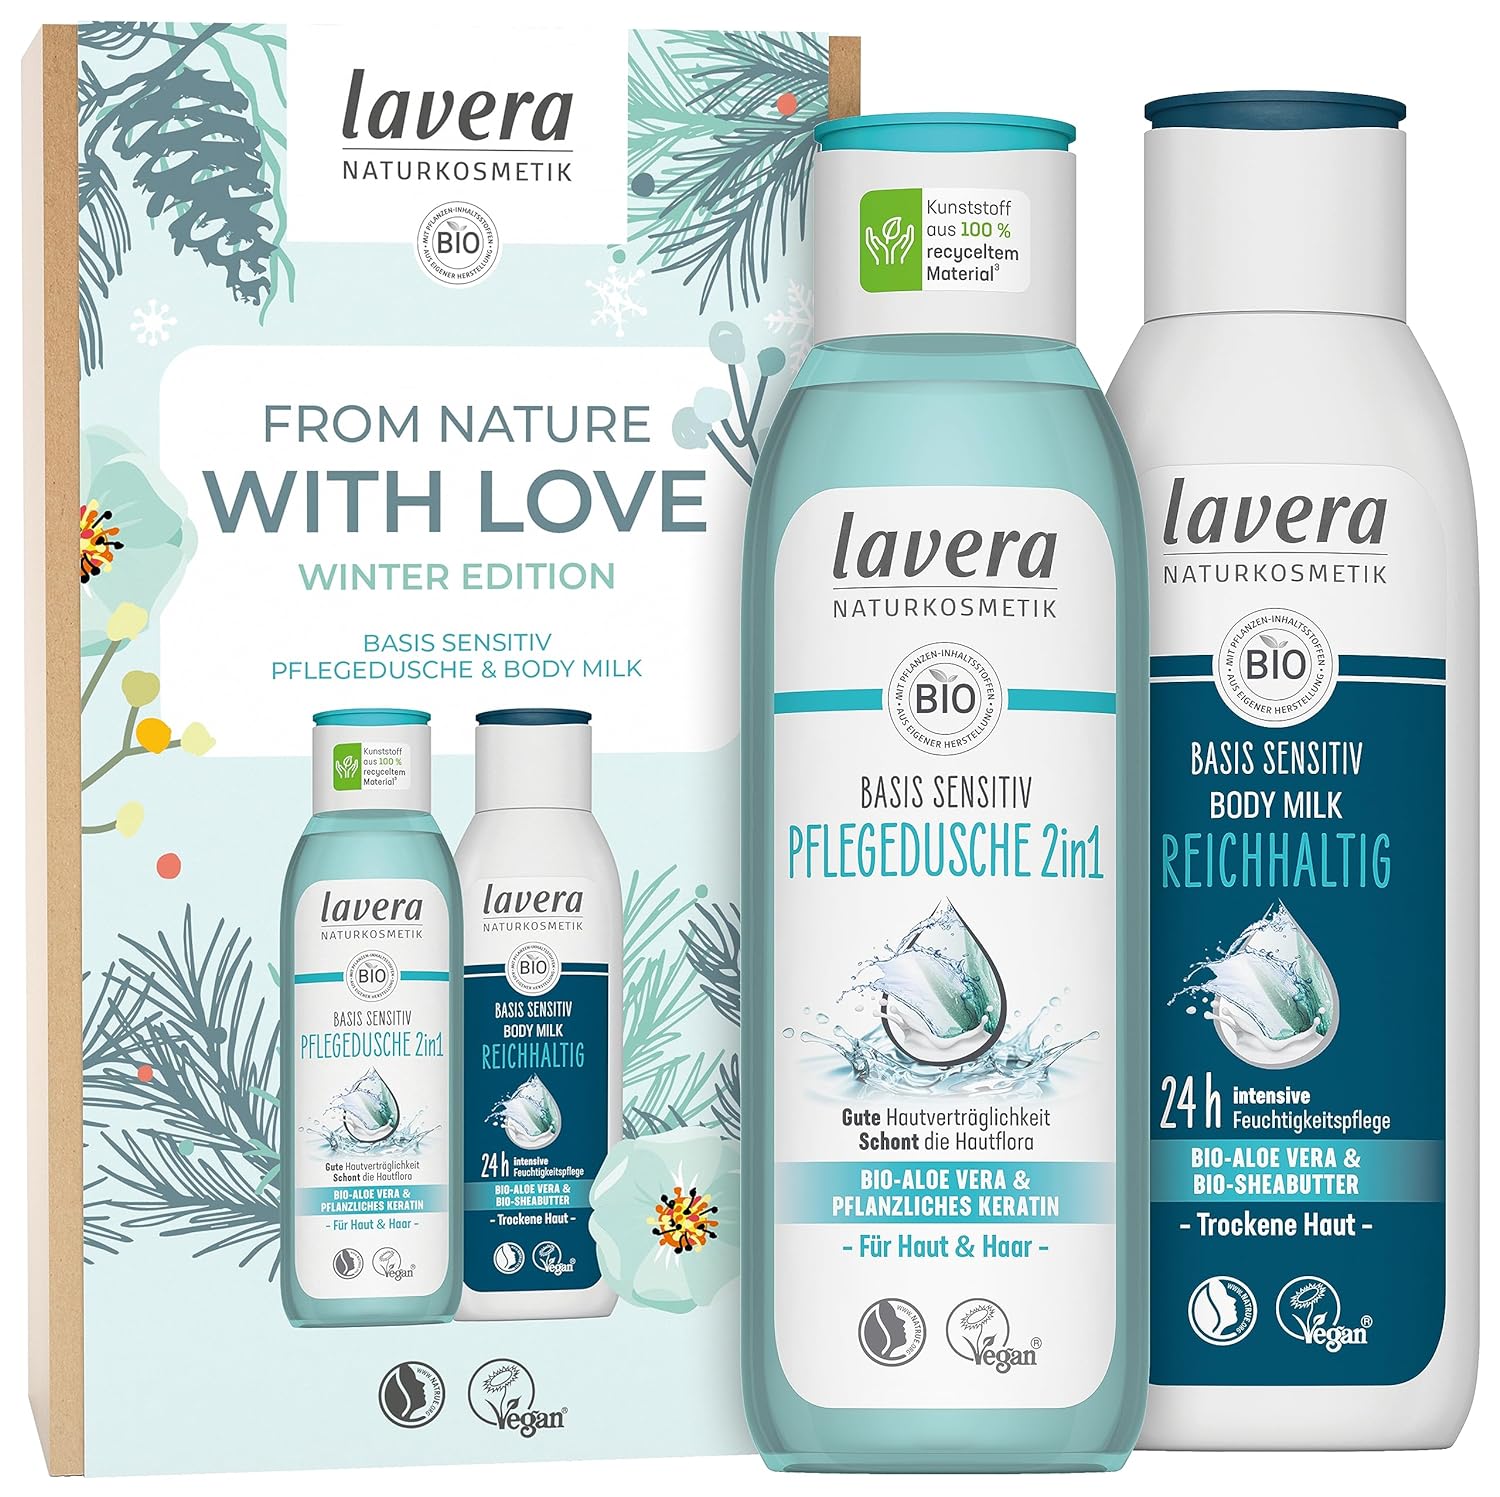 lavera Gift Set - From Nature with Love - Winter Edition - Shower & Body Milk - Basis Sensitive - Vegan